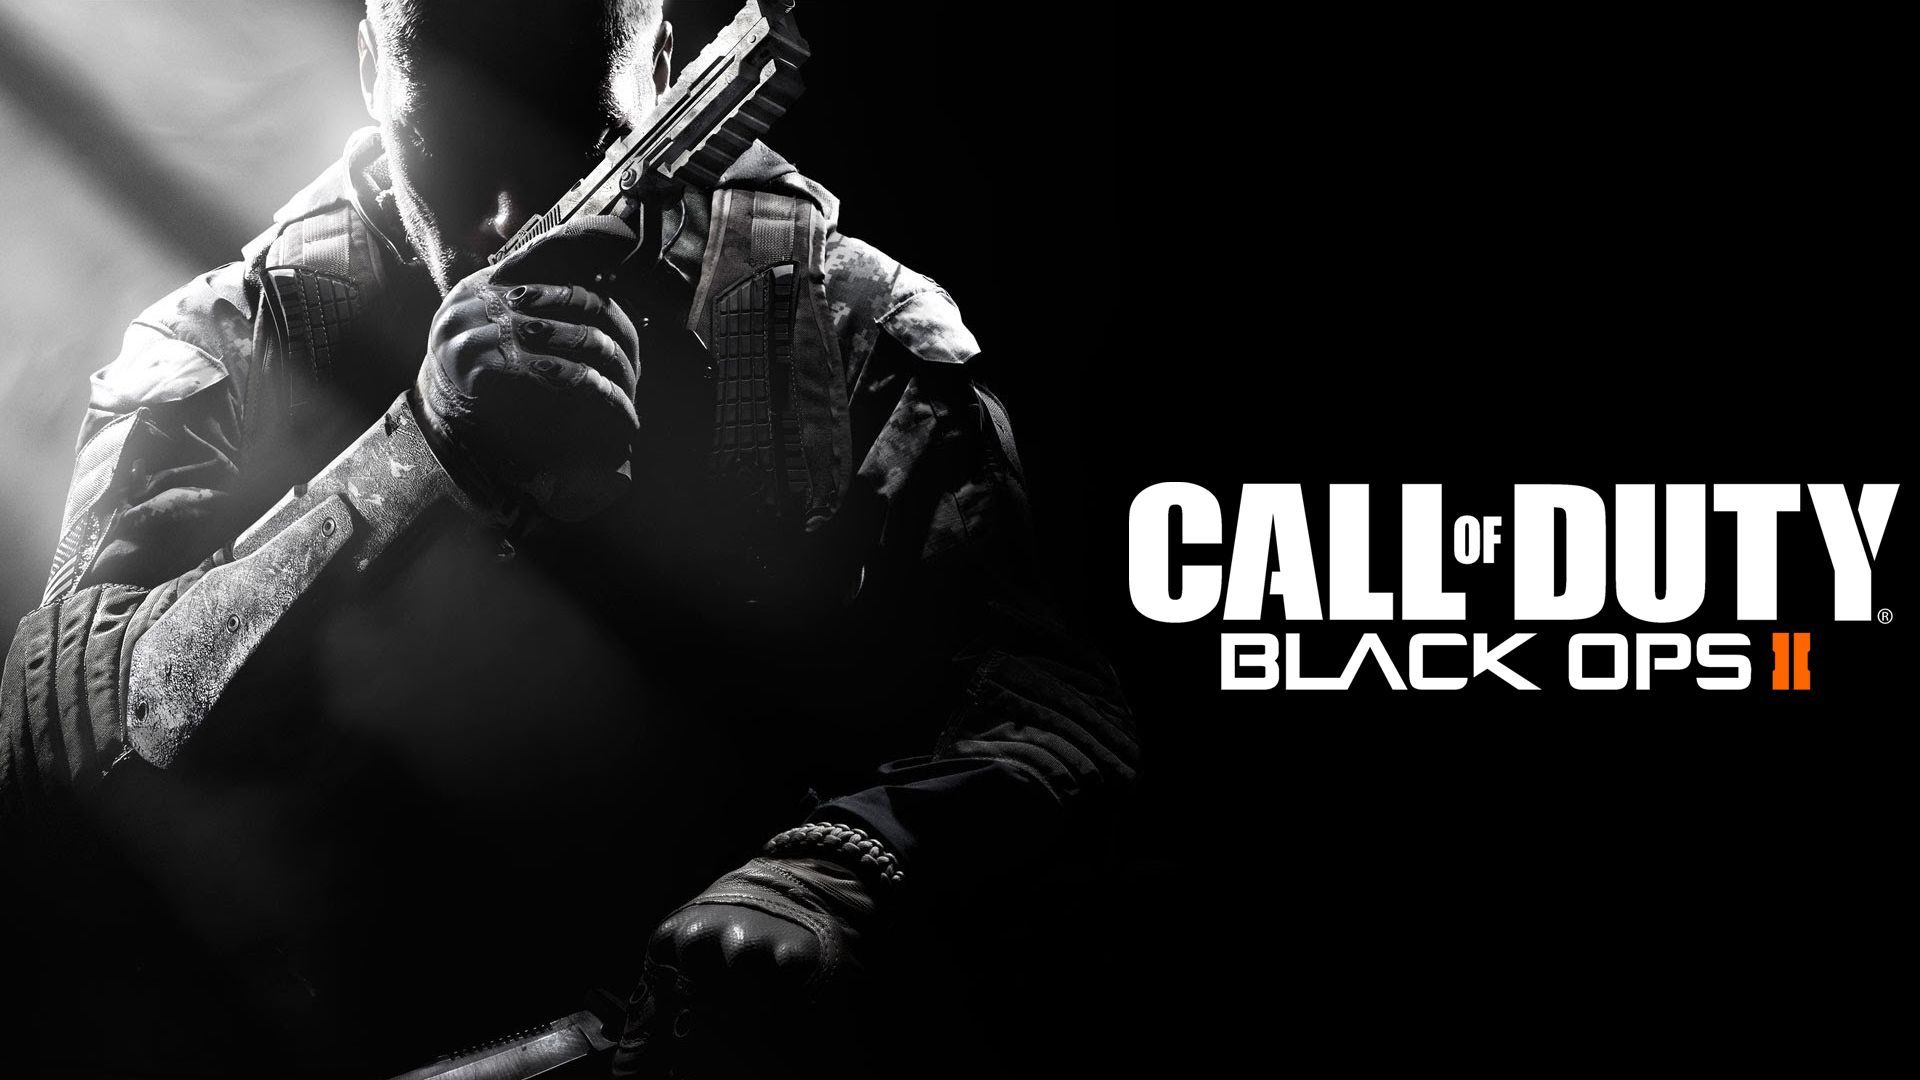 Call of Duty: Black Ops II - Vengeance at the best price